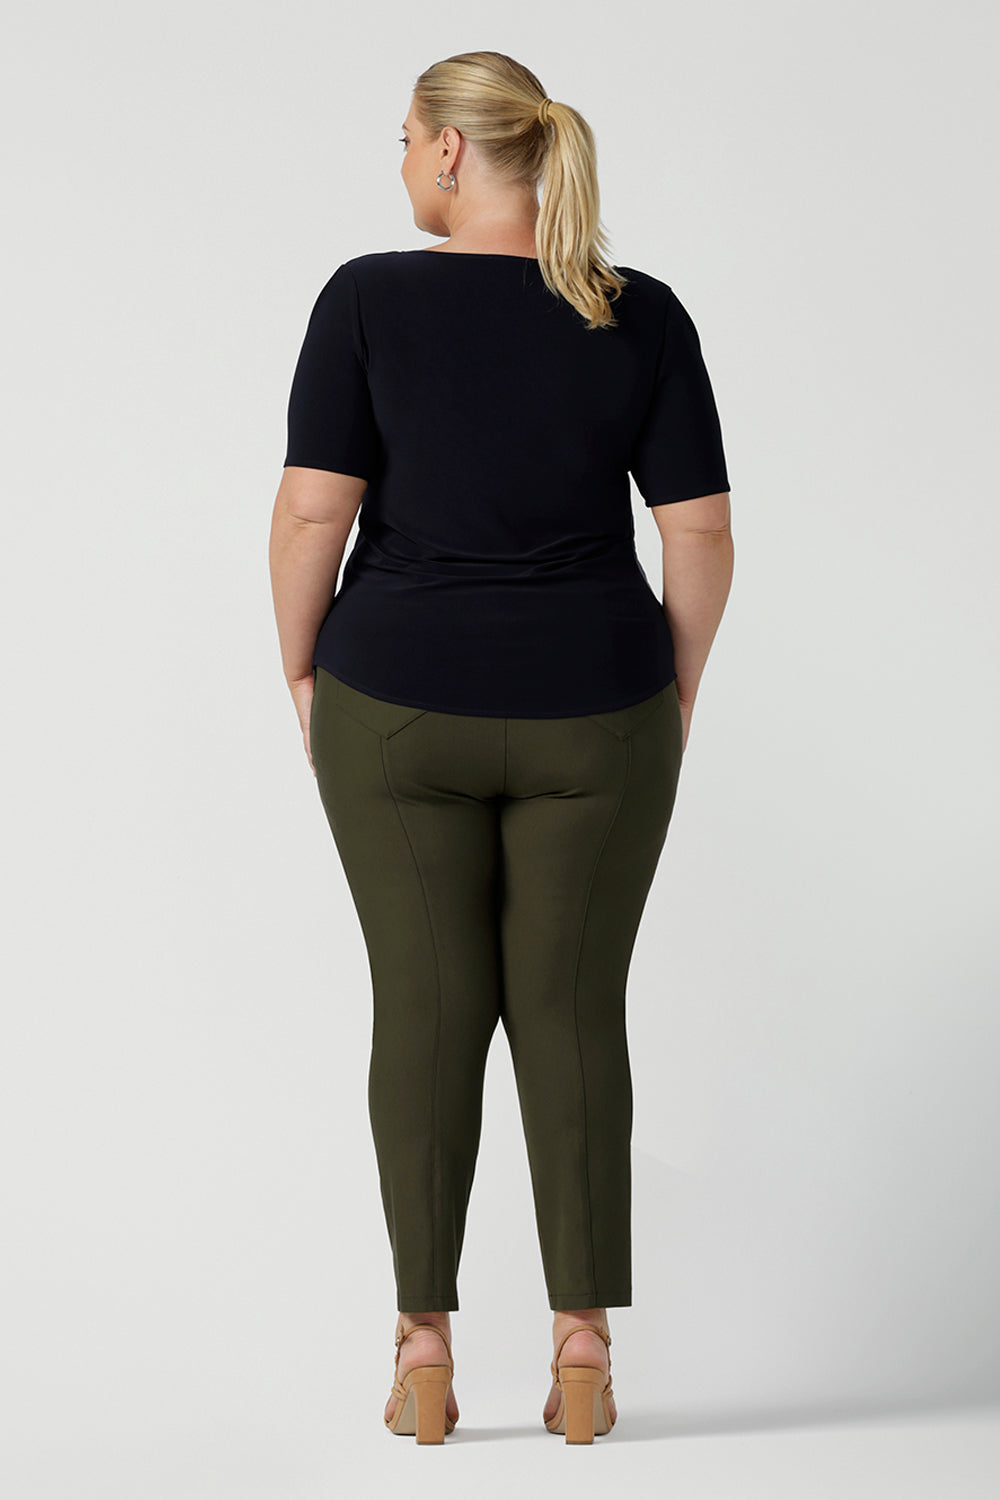 Back view of slim leg ponte pants for workwear. Curvy workwear for women, size inclusive 8-24 womens work pants. Olive green colour with cropped leg. Comfortable work pants.